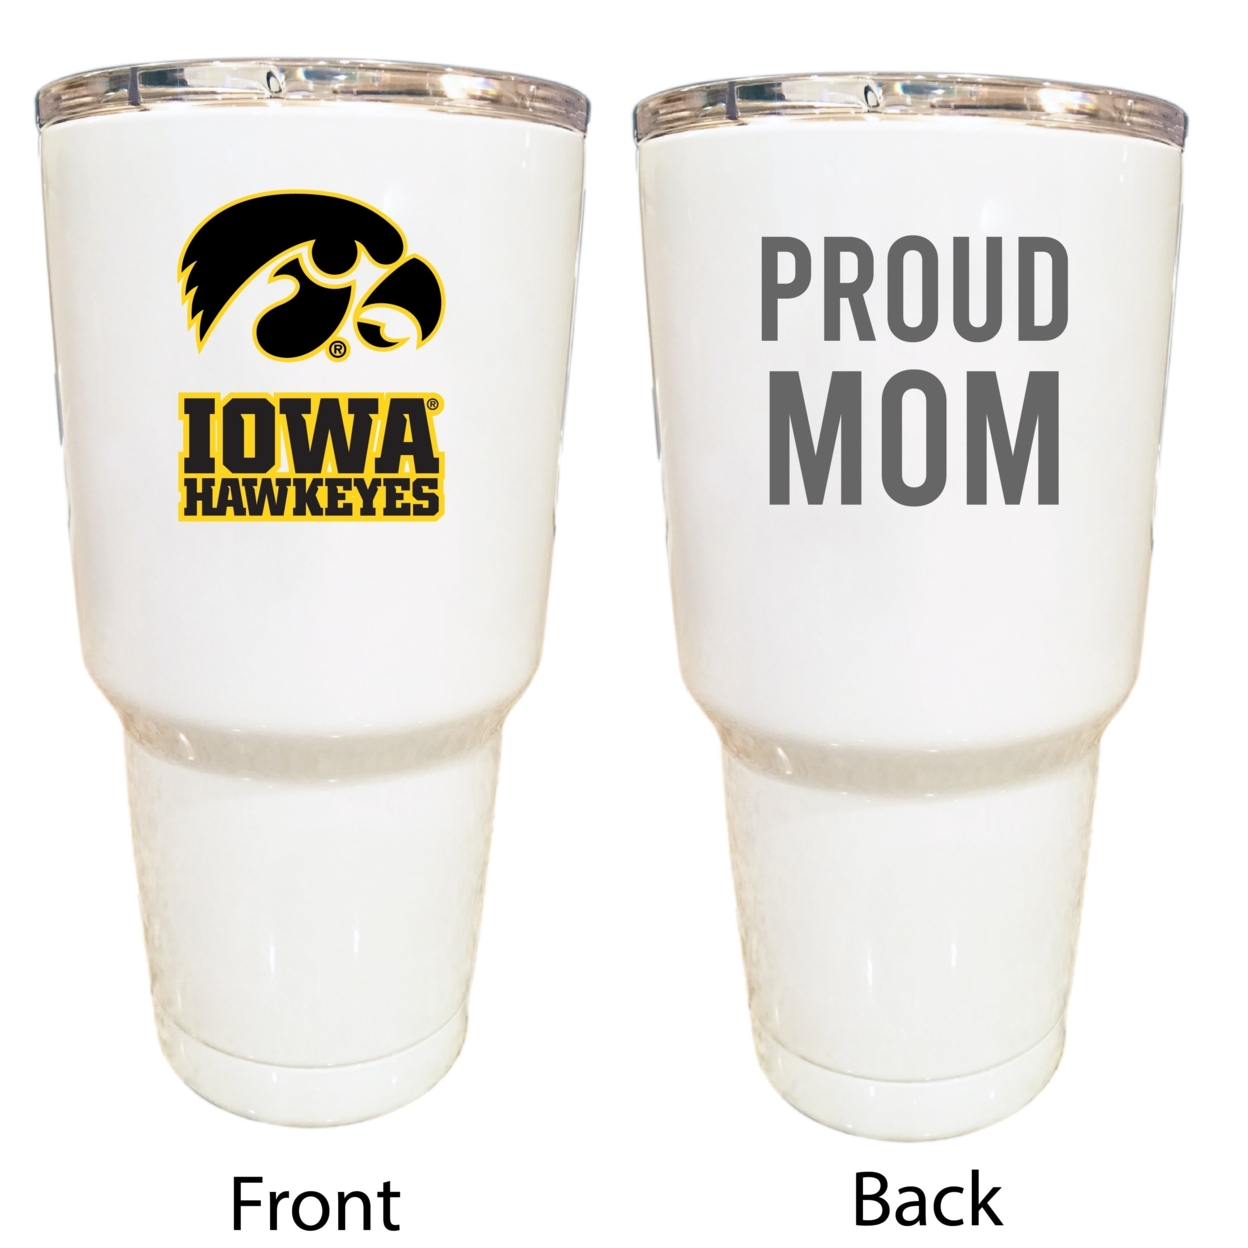 Iowa Hawkeyes Proud Mom 24 Oz Insulated Stainless Steel Tumblers Choose Your Color.